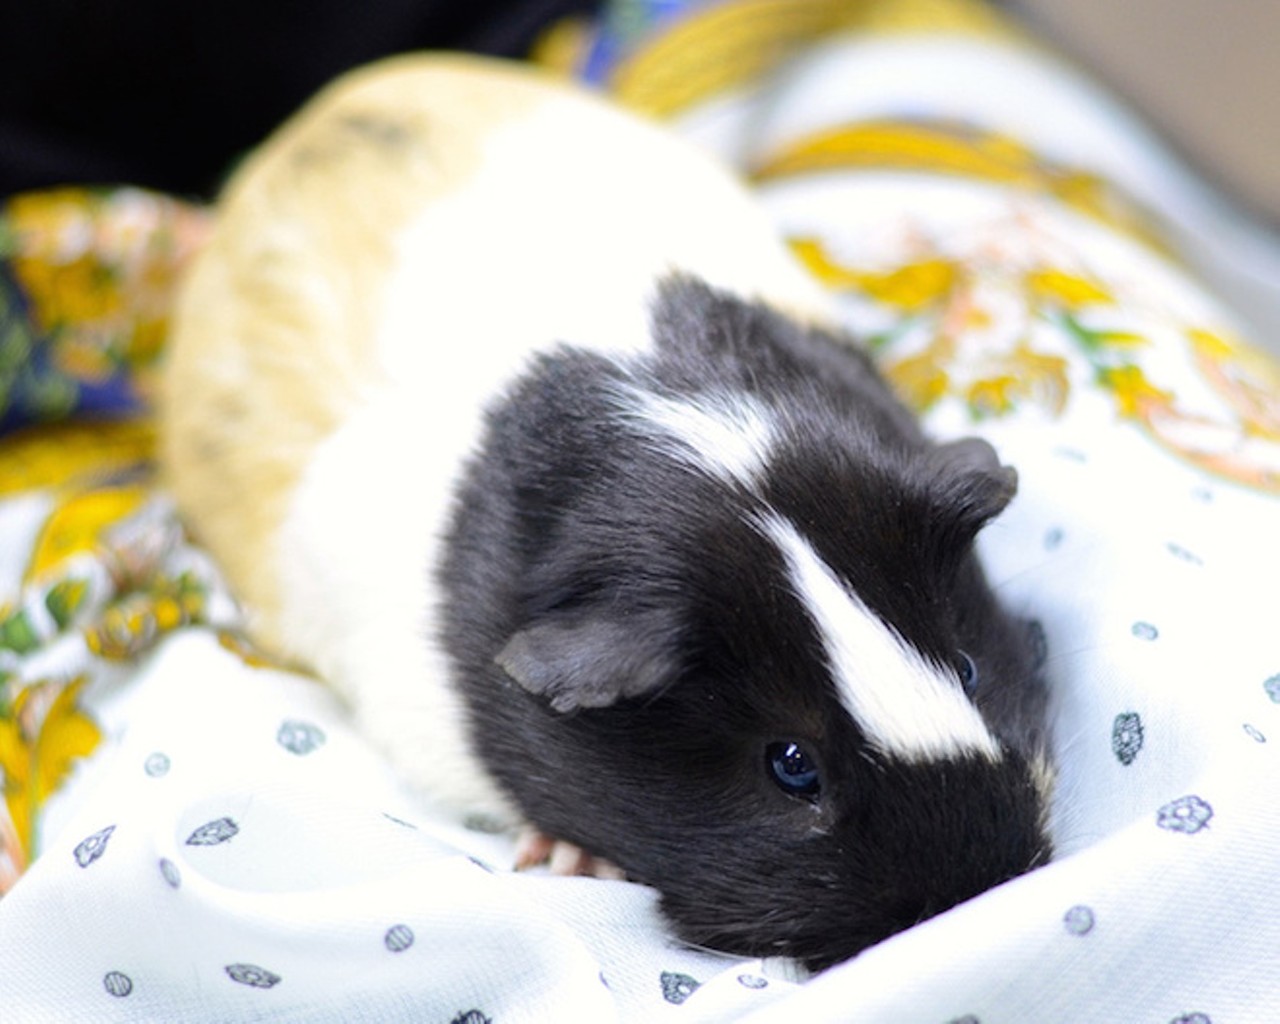 And a guinea pig, for good measure.